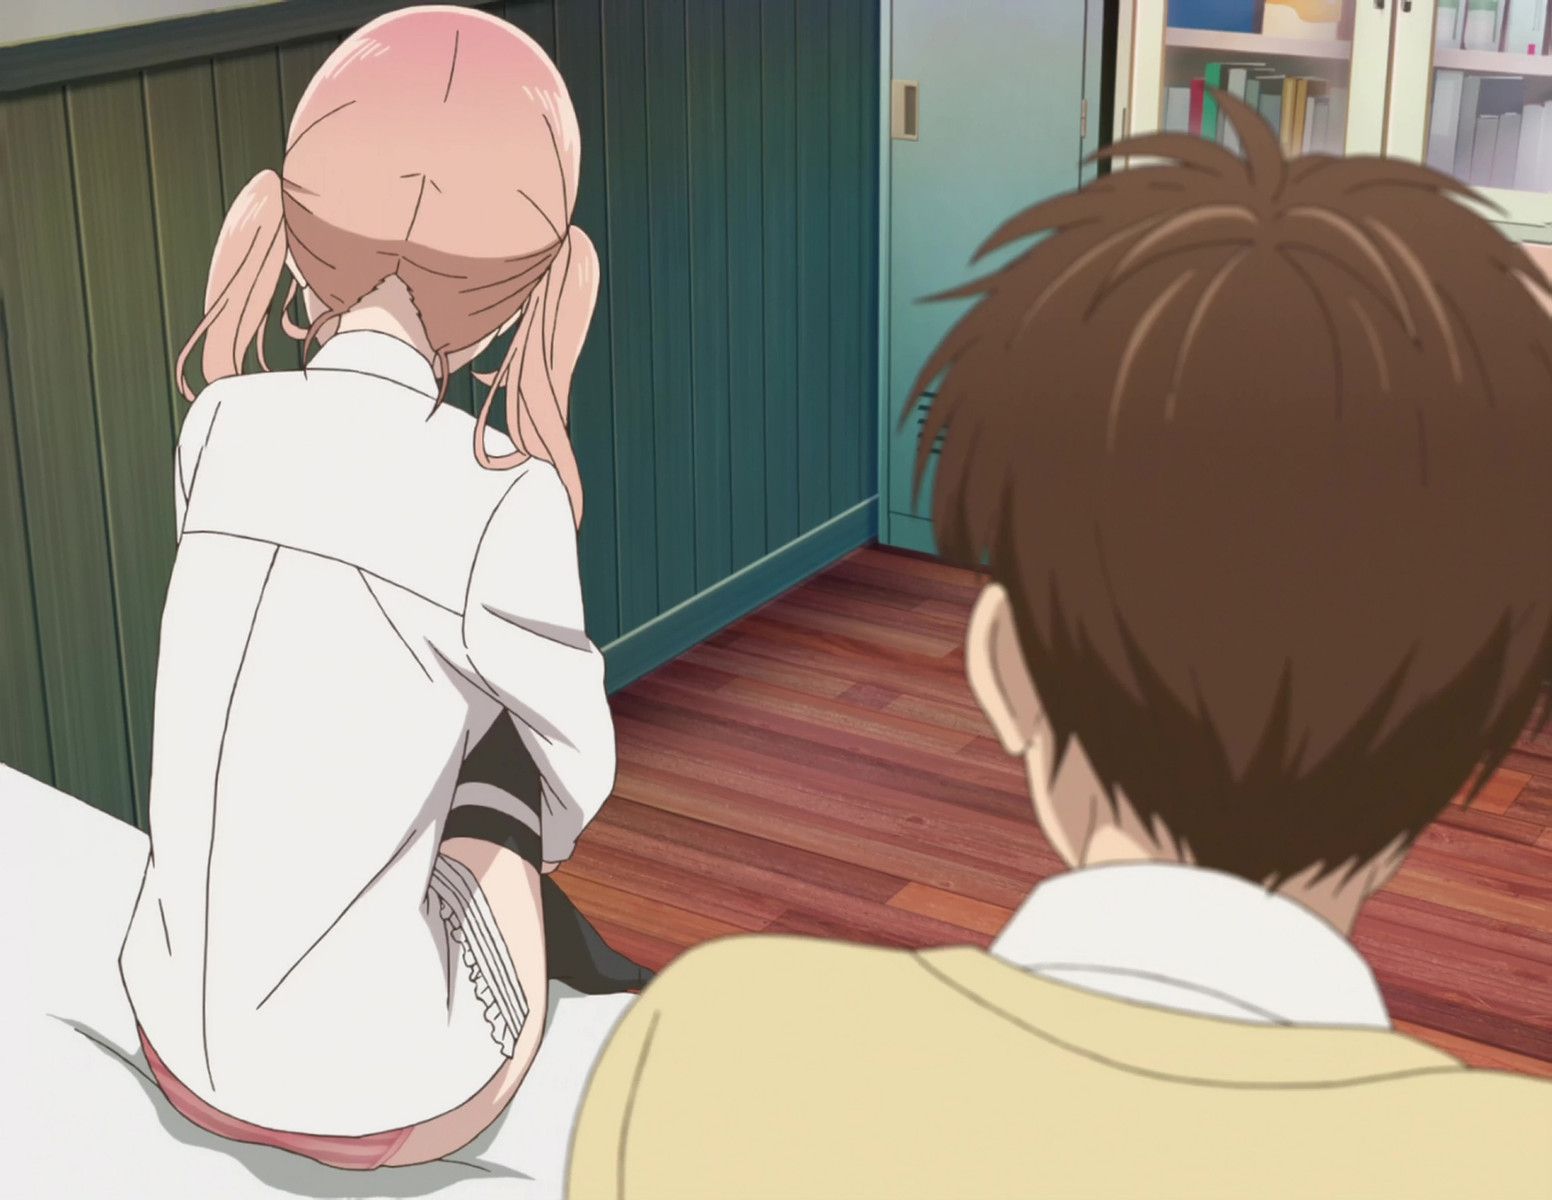 Image】 The cuteness of "Love and Lies" Sanada Ria is abnormal wwwwwww 31